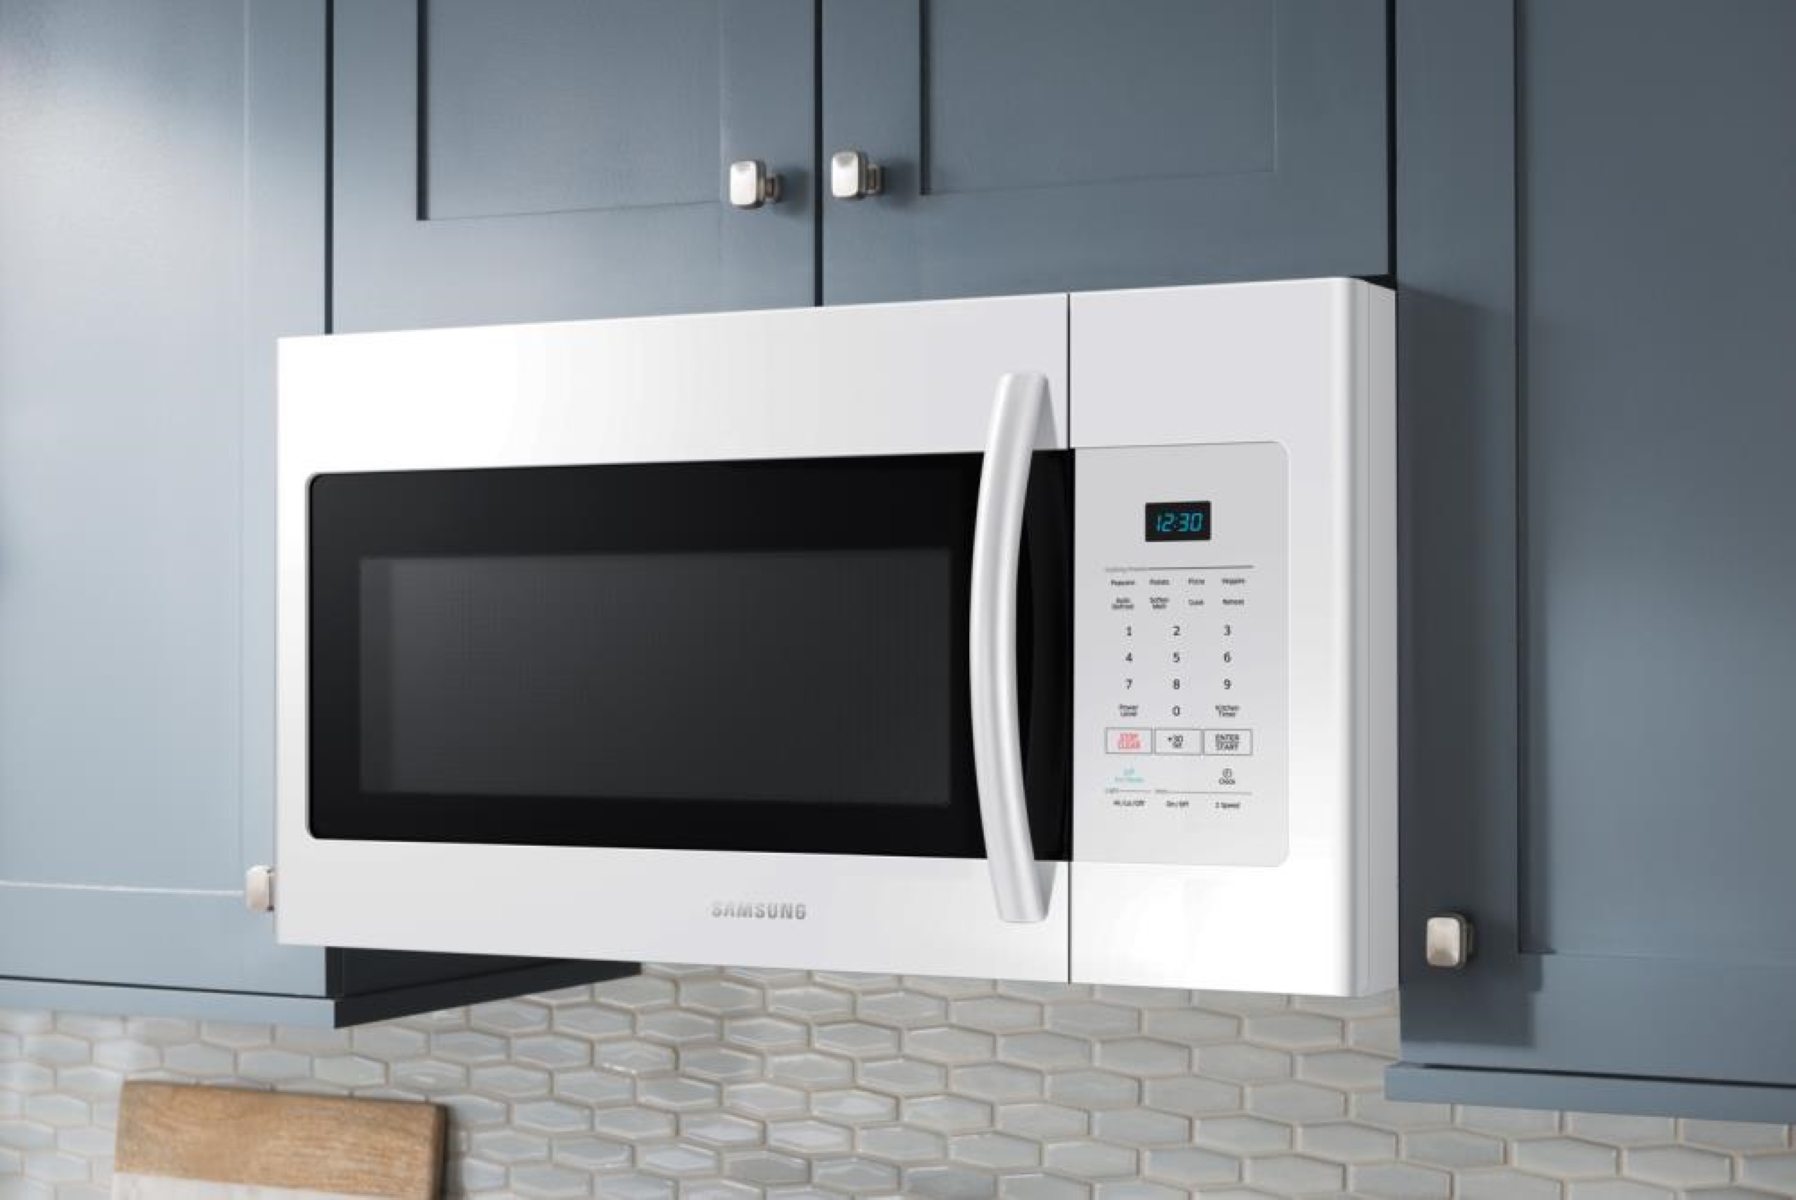 How To Fix The Error Code E-22 For Samsung Microwave